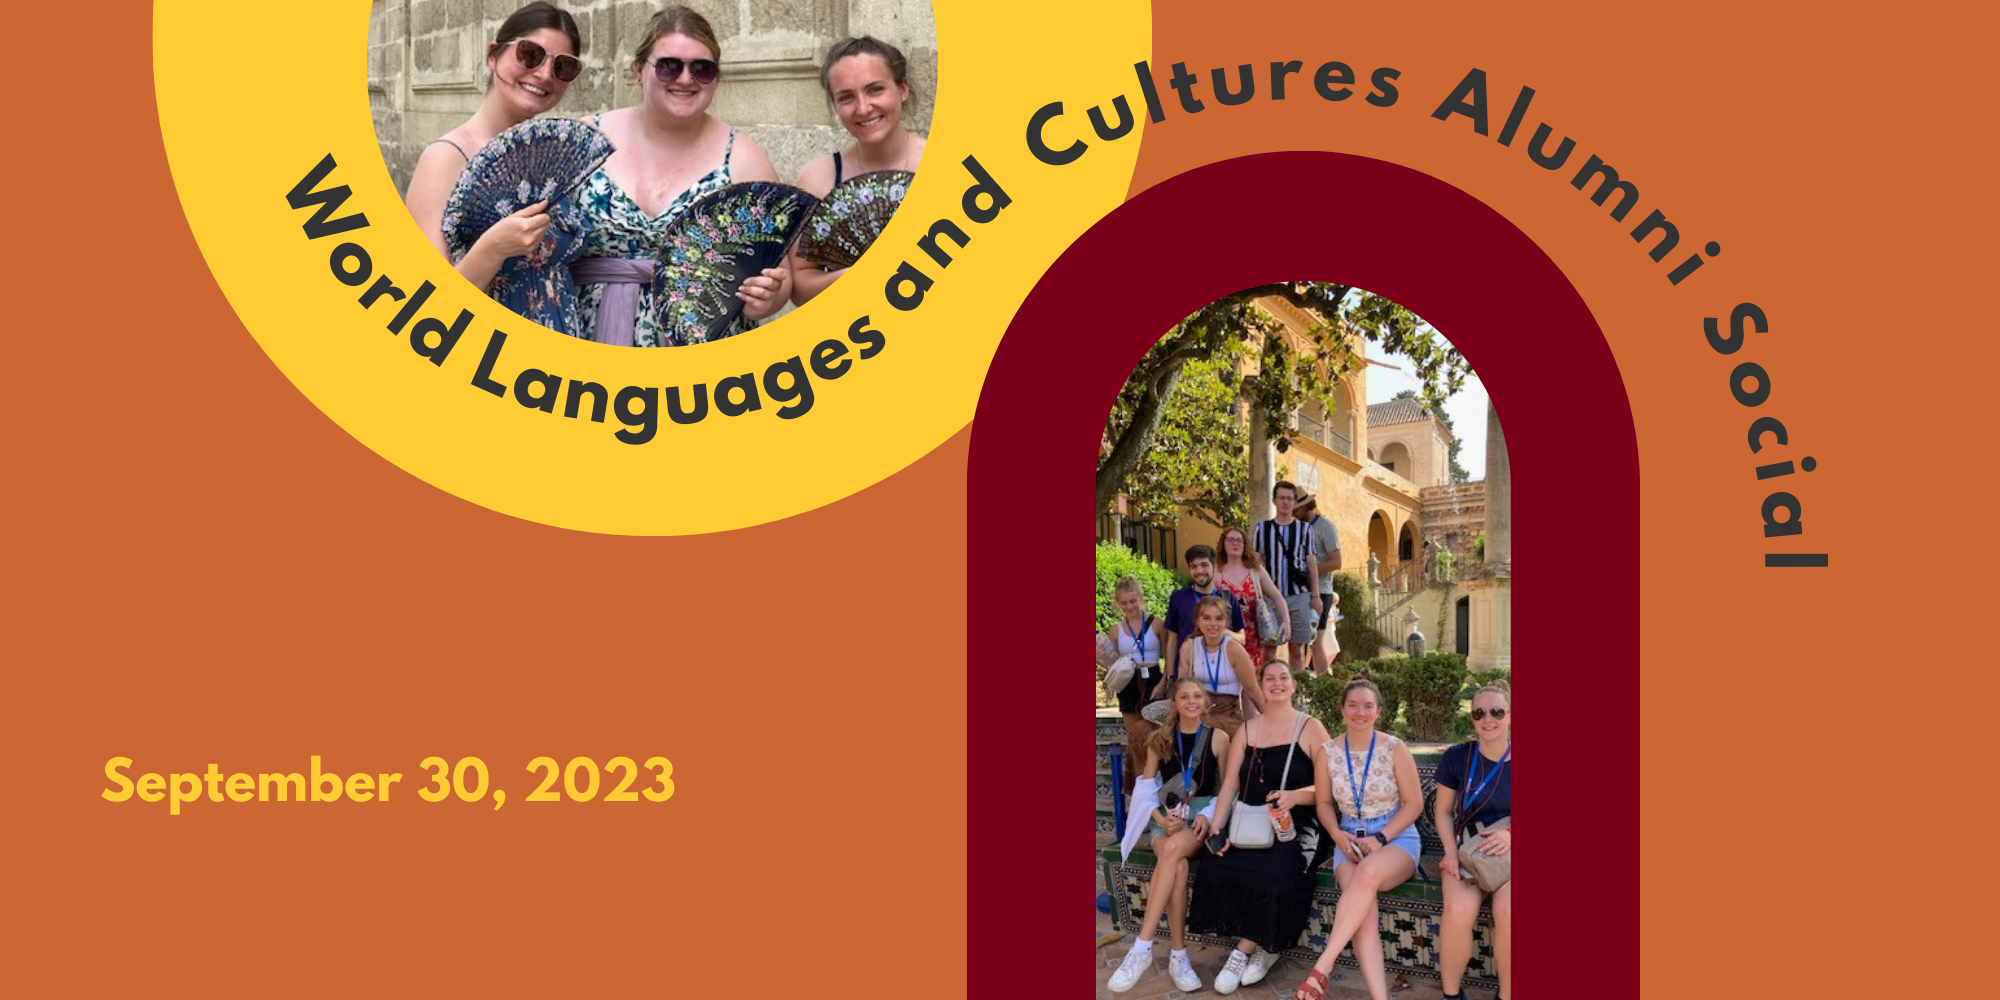 World Languages and Cultures